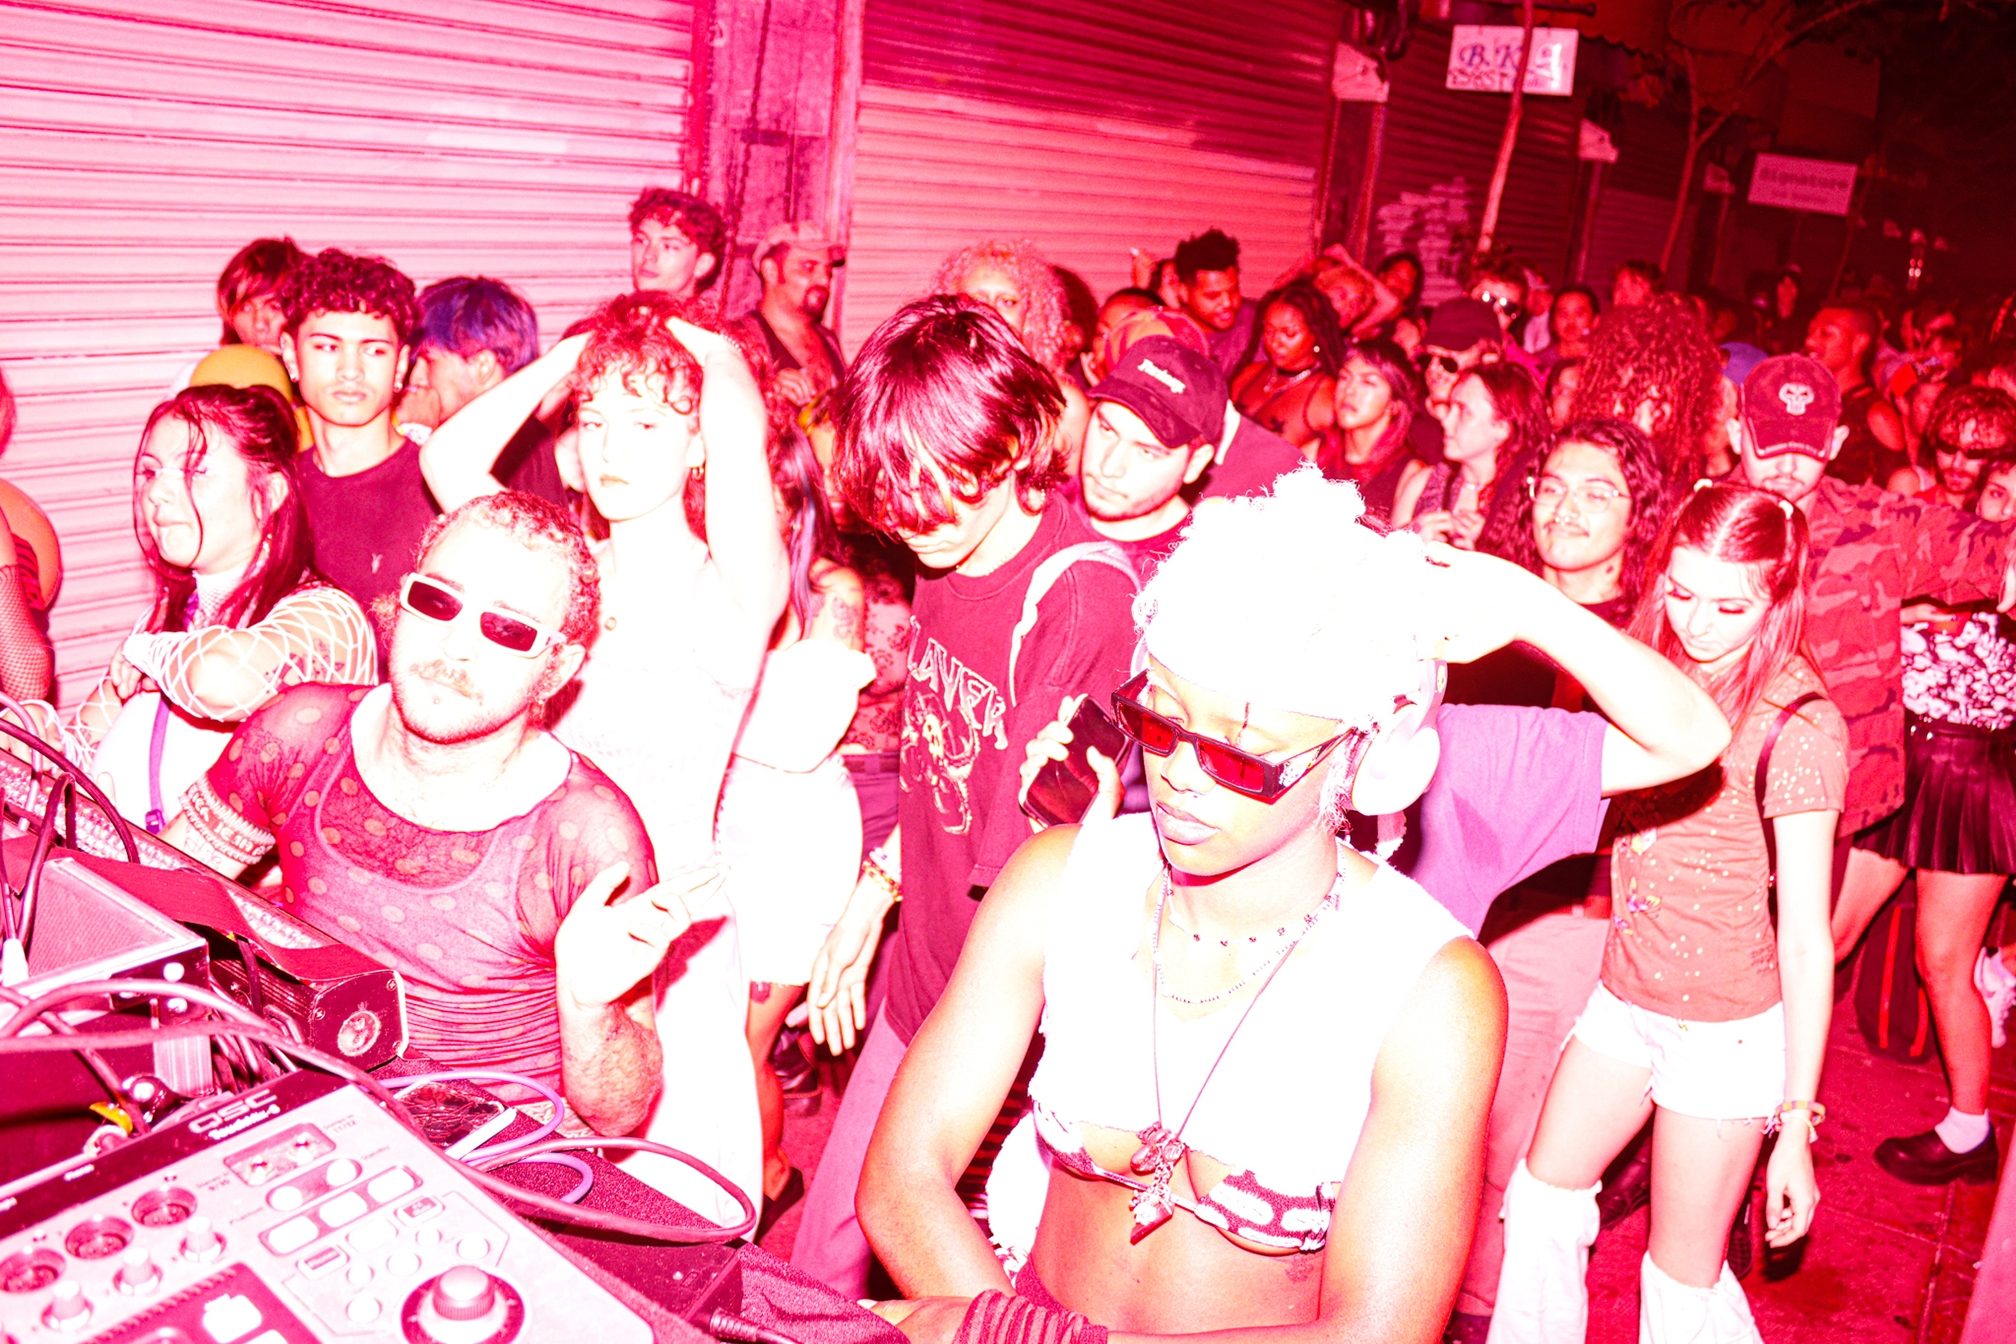 After the pandemic, LAs rave underground bounces back stronger - Features  pic